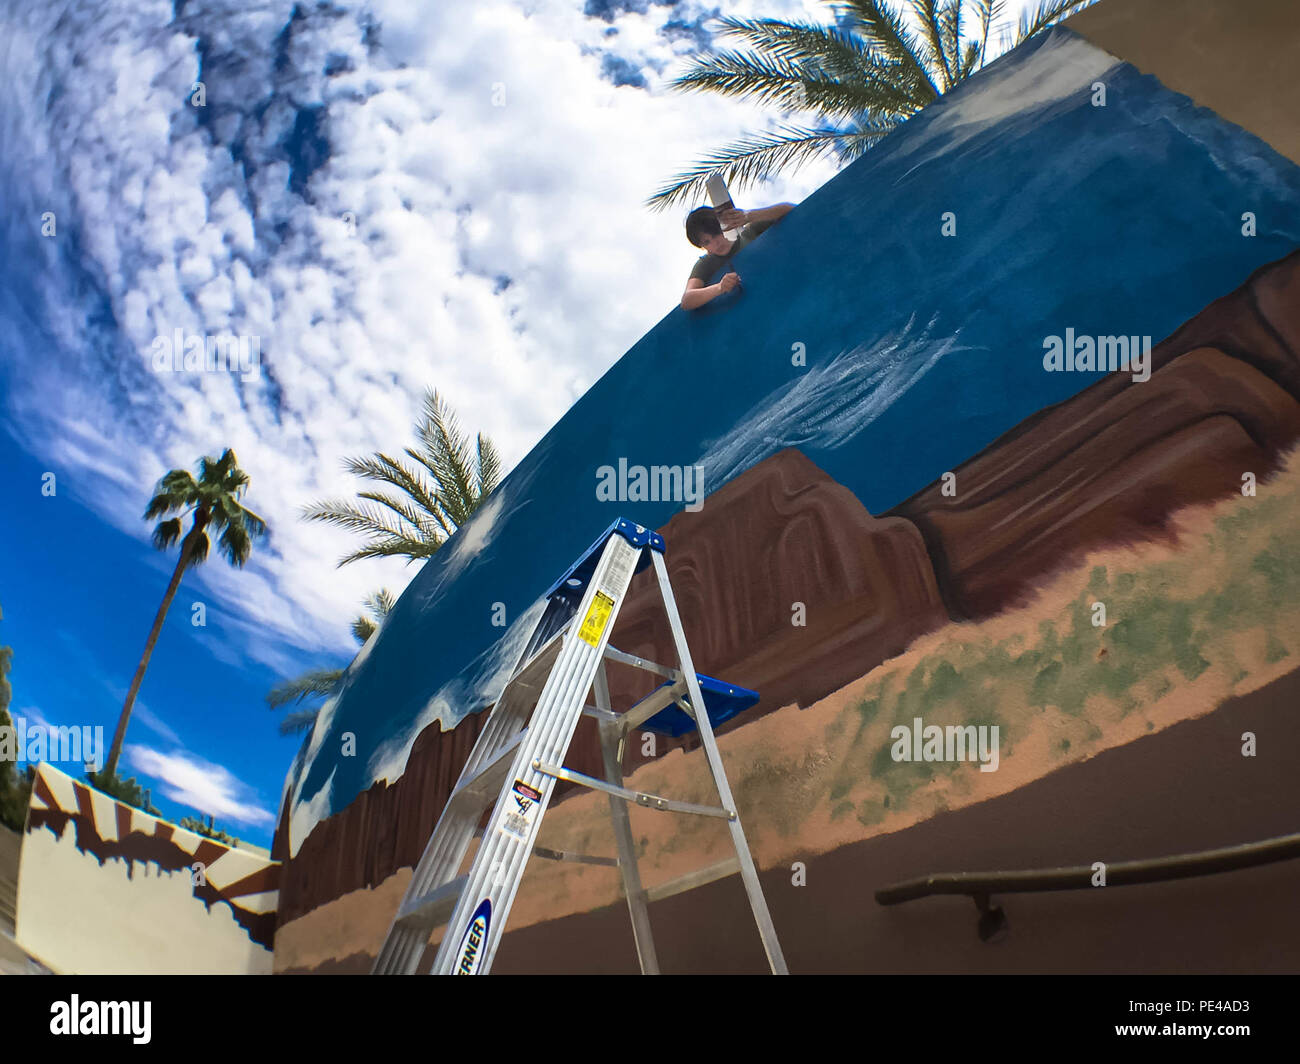 U.S. Marine Corps Sgt. Ashleigh B. Gawat, a Marine Corps combat camerawoman, paints a Marine Corps and Arizona themed mural at the Civic Center in Scottsdale, Ariz., Sept. 7, 2015, to commemorate Marine Week Phoenix, Sept. 10-13. Gawat, a native of Griswold, Conn. is stationed at the Pentagon in Washington, D.C., and is taking on the large mural with four other Marines. Sept. 10-13, your Marines will perform band concerts, showcase equipment and aircraft, such as the MV-22 Osprey and AH-1Z Super Cobra, and engage in community service events. (U.S. Marine Corps photo by Sgt. Tyler J. Bolken) Stock Photo